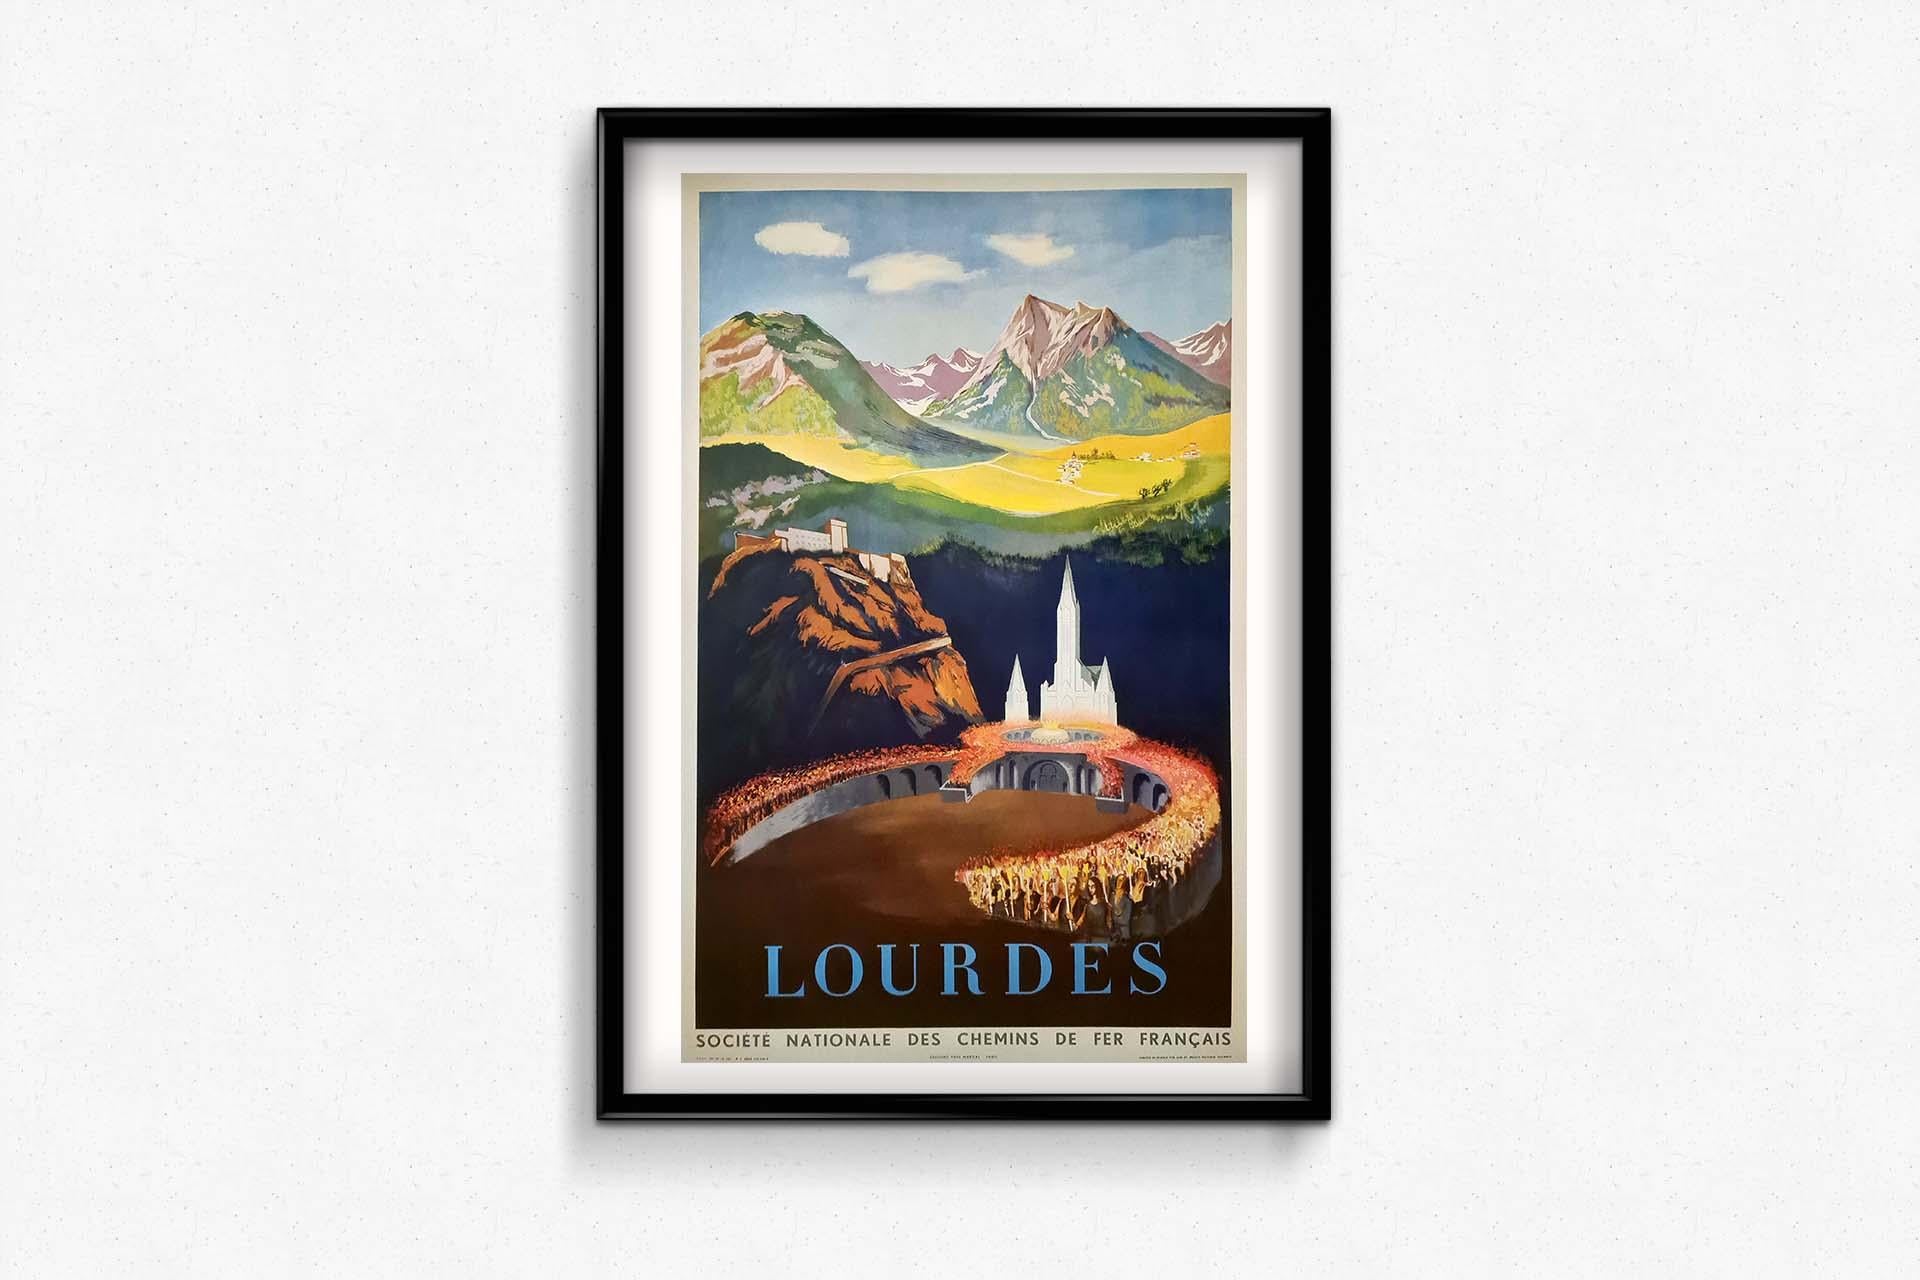 The 1951 original travel poster by Louis Berthomme Saint-André for Lourdes, commissioned by the French National Railway Company (SNCF), is a captivating testament to the allure of the famed pilgrimage destination in southwestern France. Berthomé, a